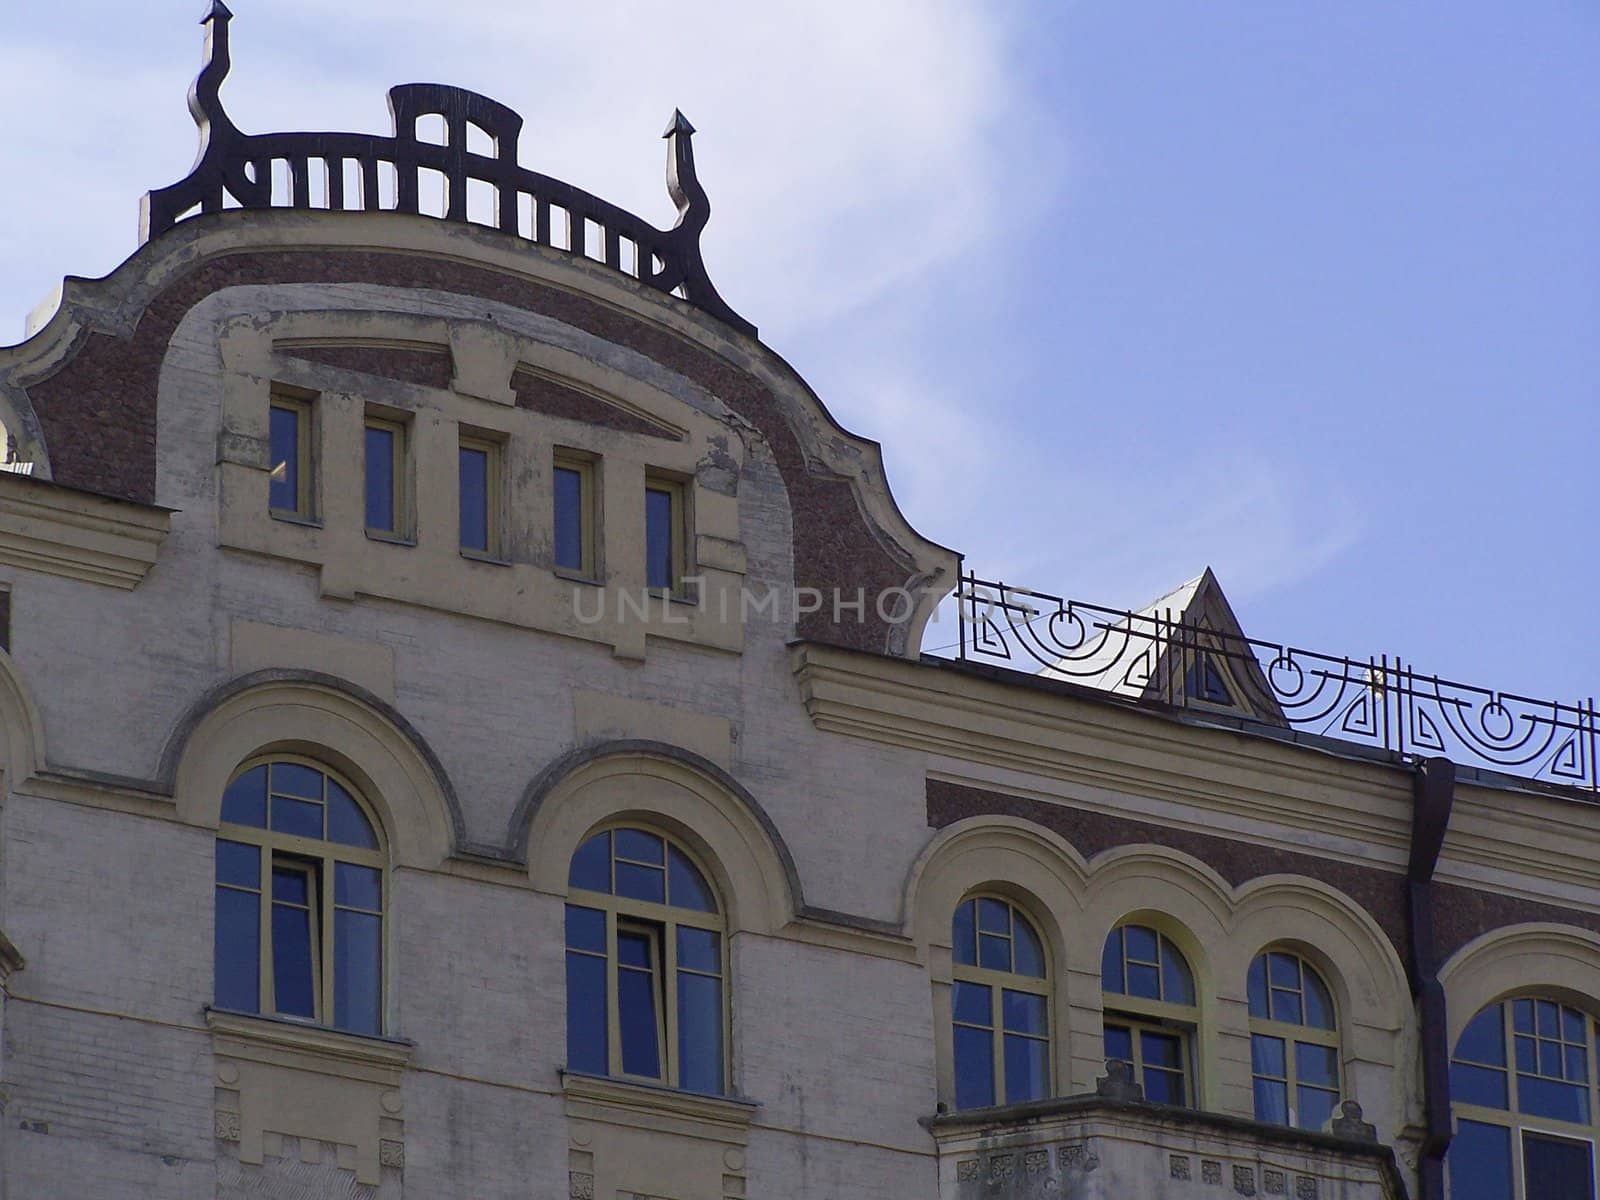 Old building with decoration on it's roof.